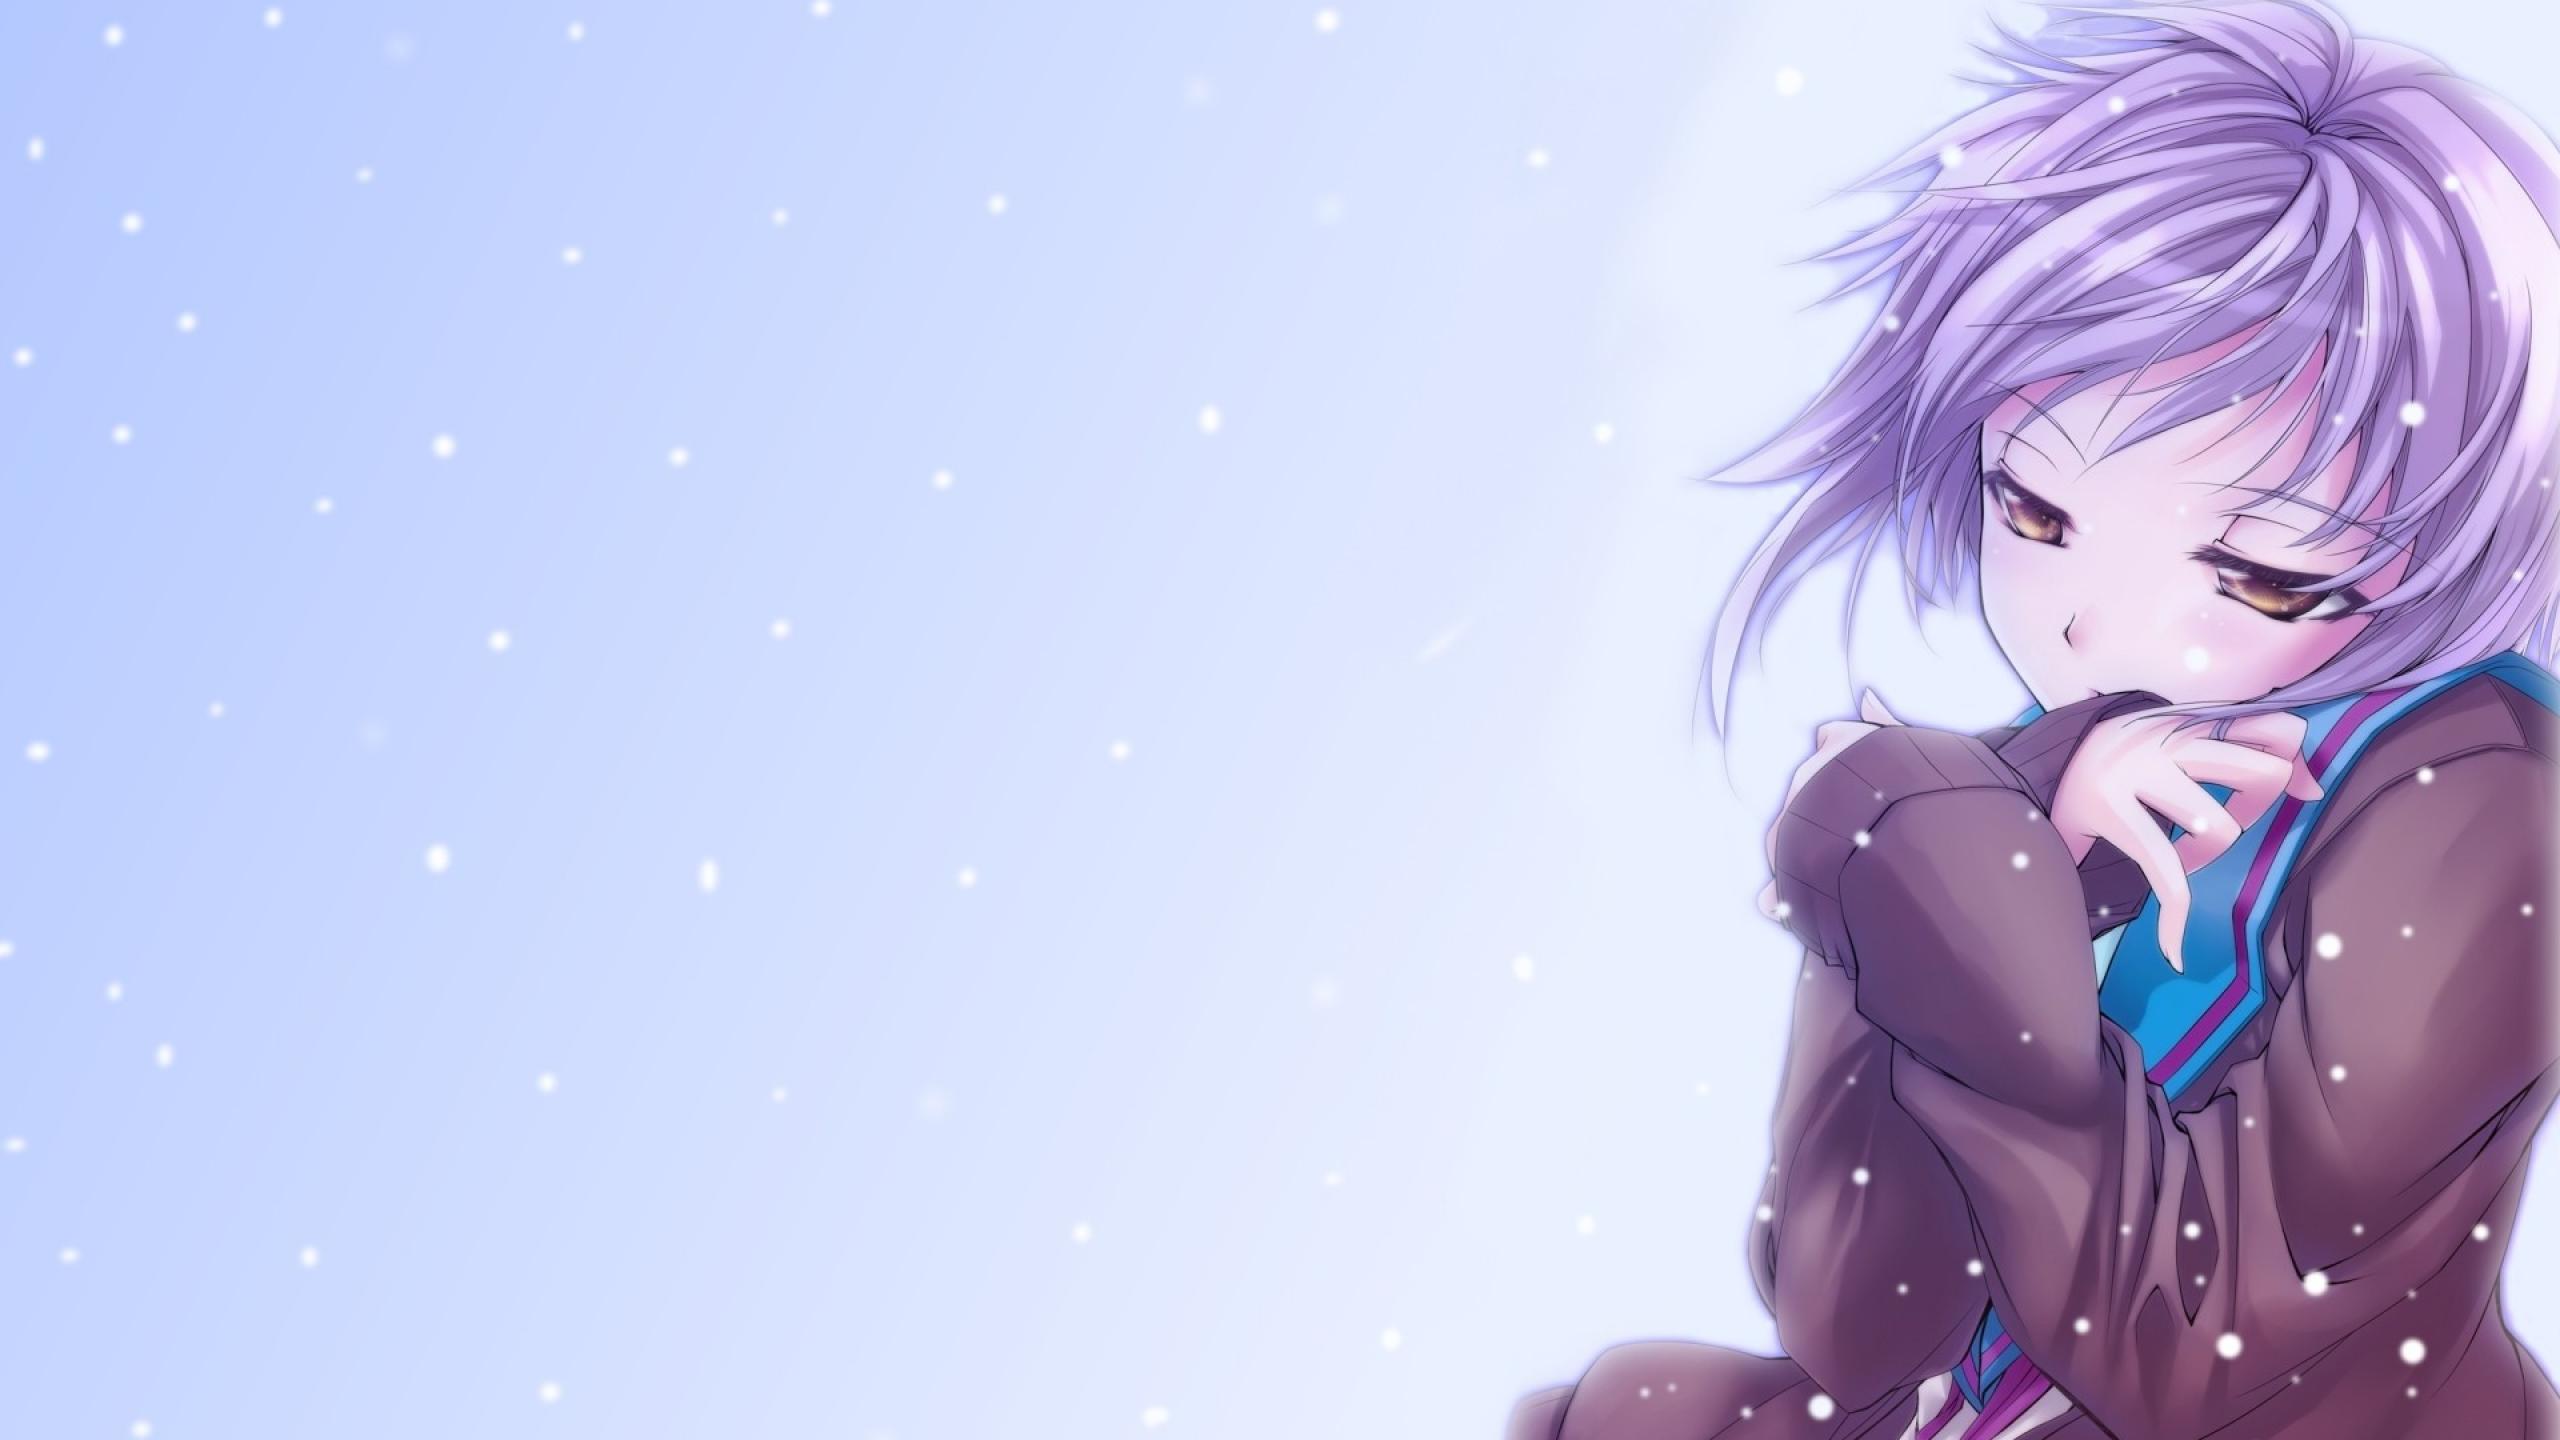 Browse Wallpapers by Sad Anime Girl Category